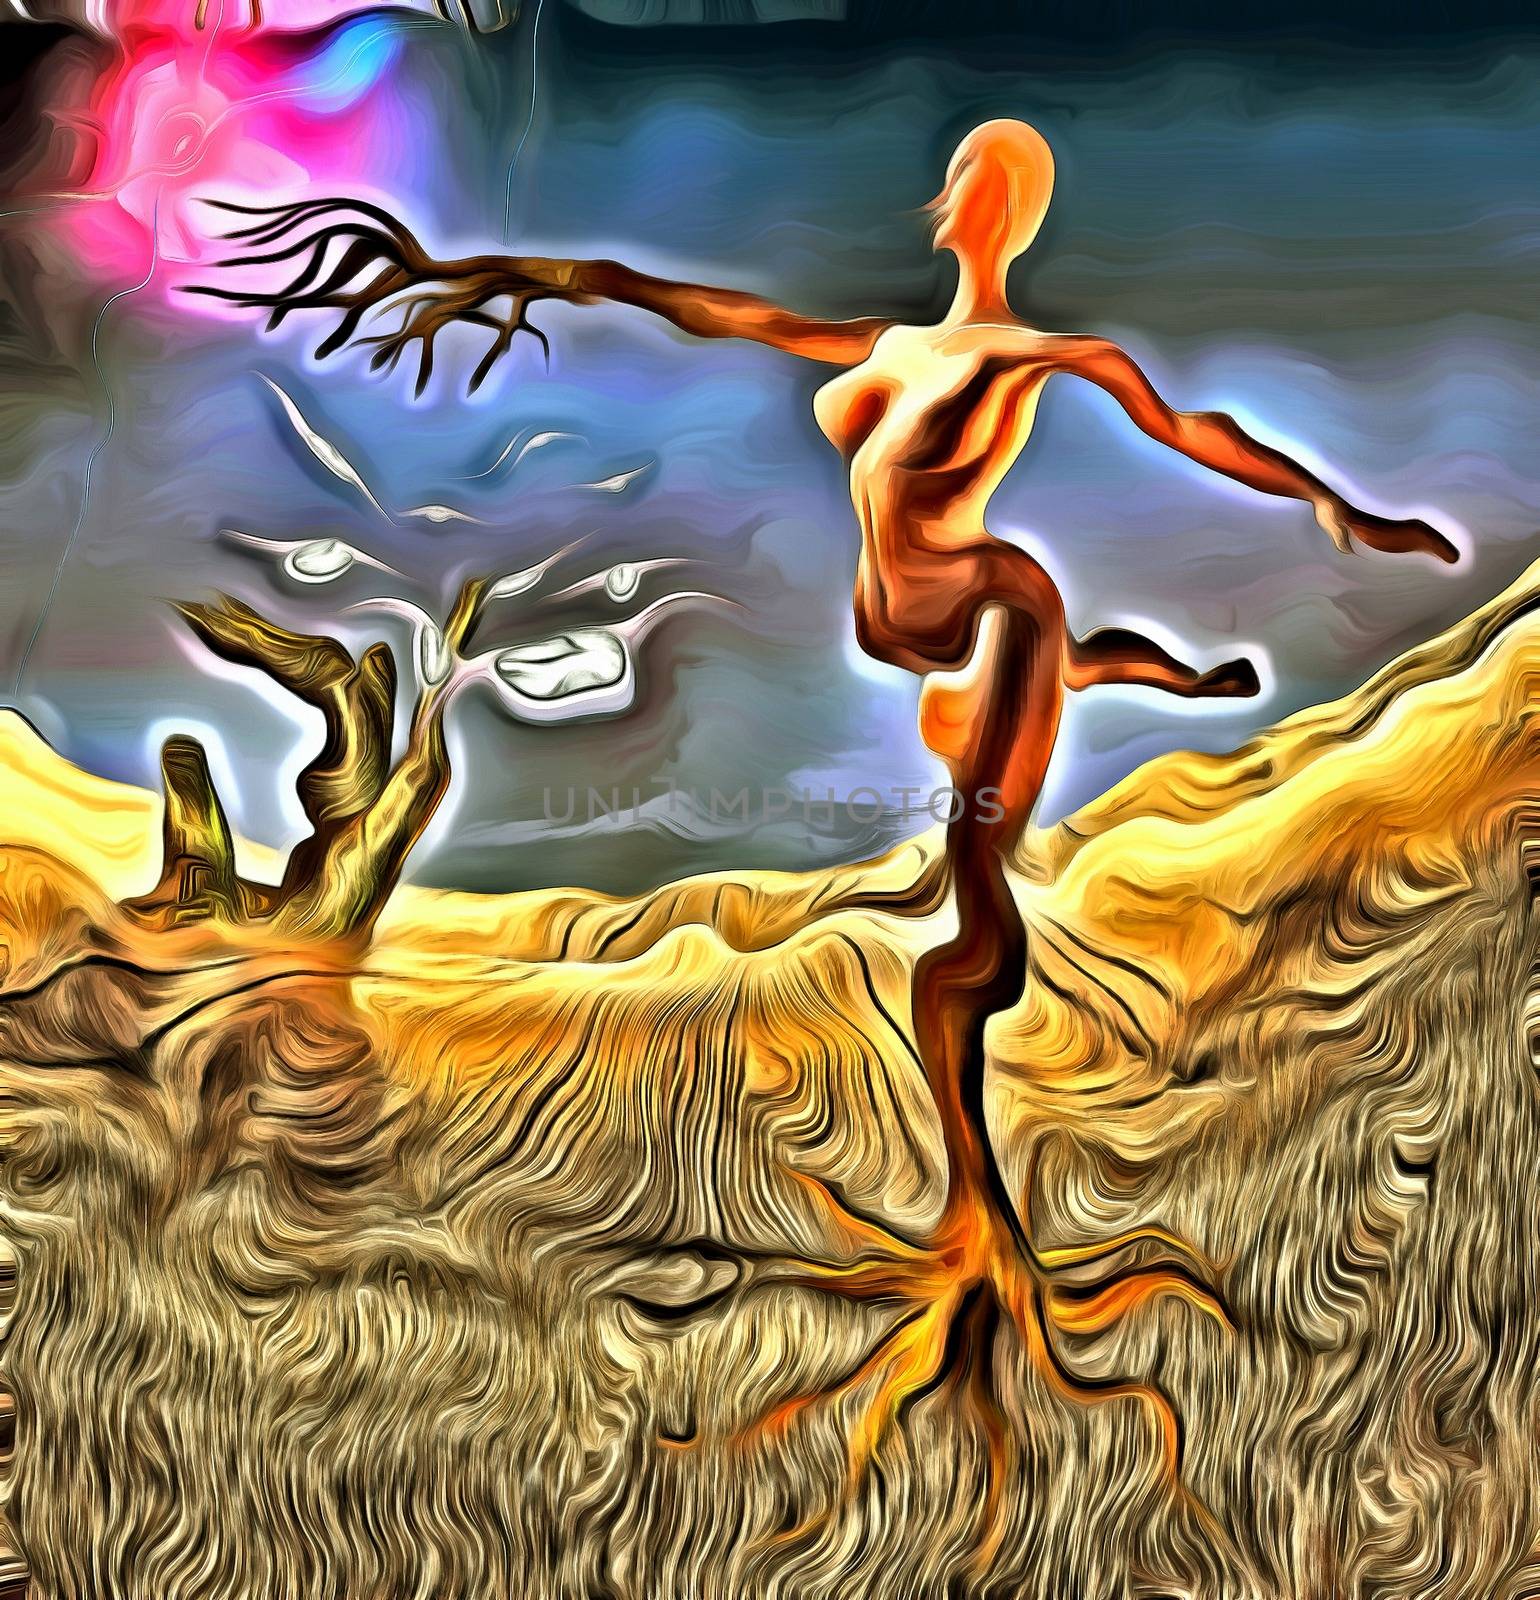 Surreal Oil Painting. Tree as a ballerina in the field. 3D rendering